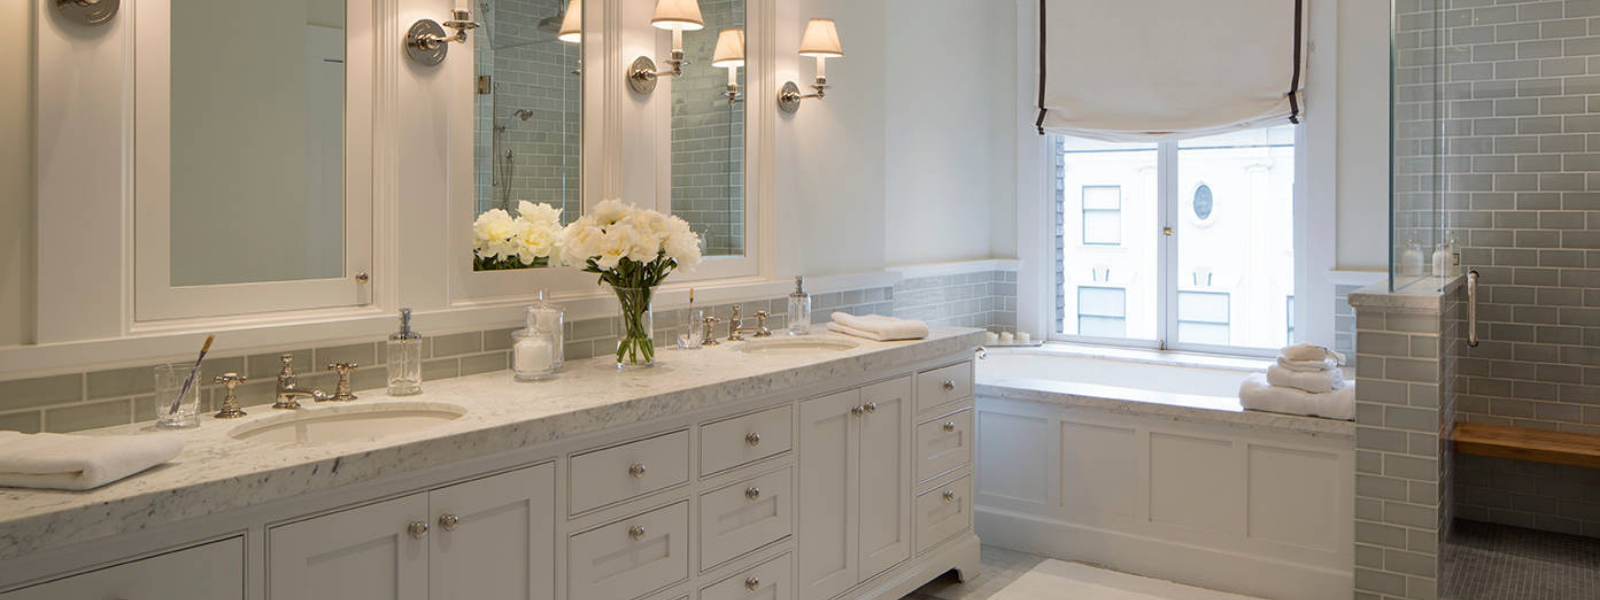 Refinishing cabinets and countertops is a cost-effective way to give your bathroom a fresh new look without the need for expensive replacements. By refinishing or painting your existing cabinets and countertops, you can completely transform the appearance of your bathroom and create a space that feels brand new.